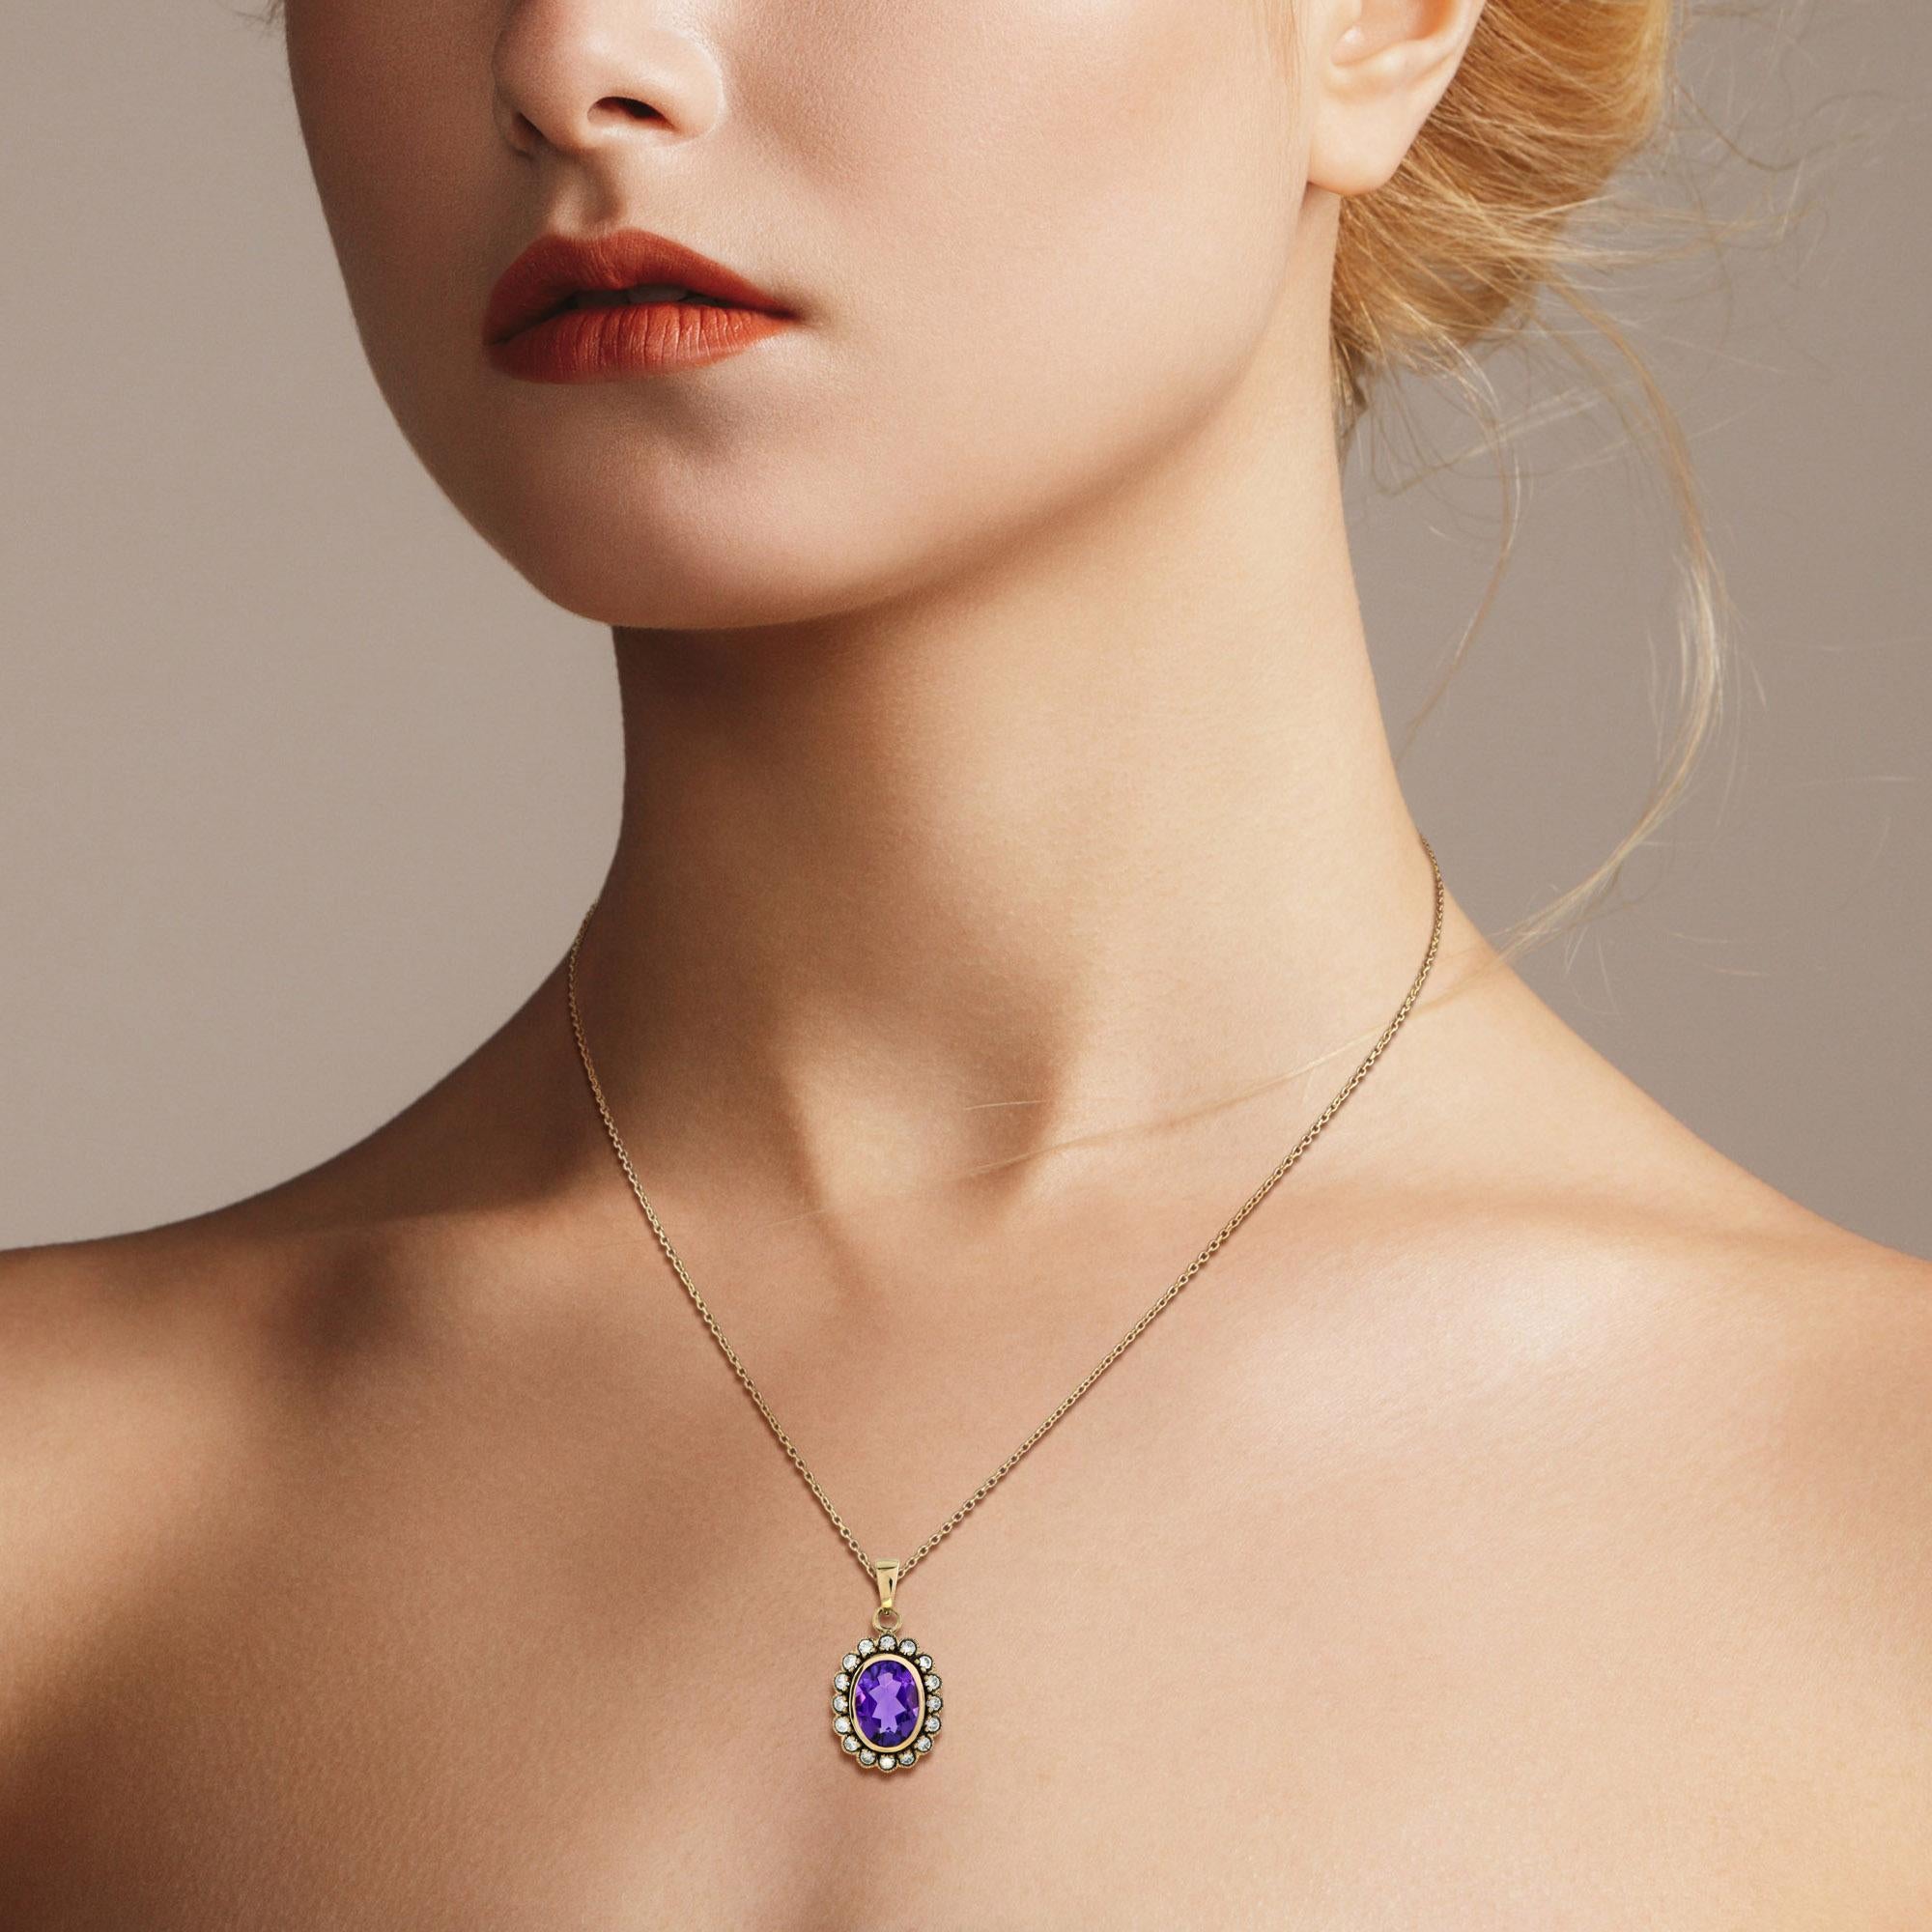 A delicate diamond halo surrounding a stunning amethyst center gemstone creates a look that adds color with a classic and elegant design. This piece is perfect to wear alone or layered with your favorite pieces to create your own personalized